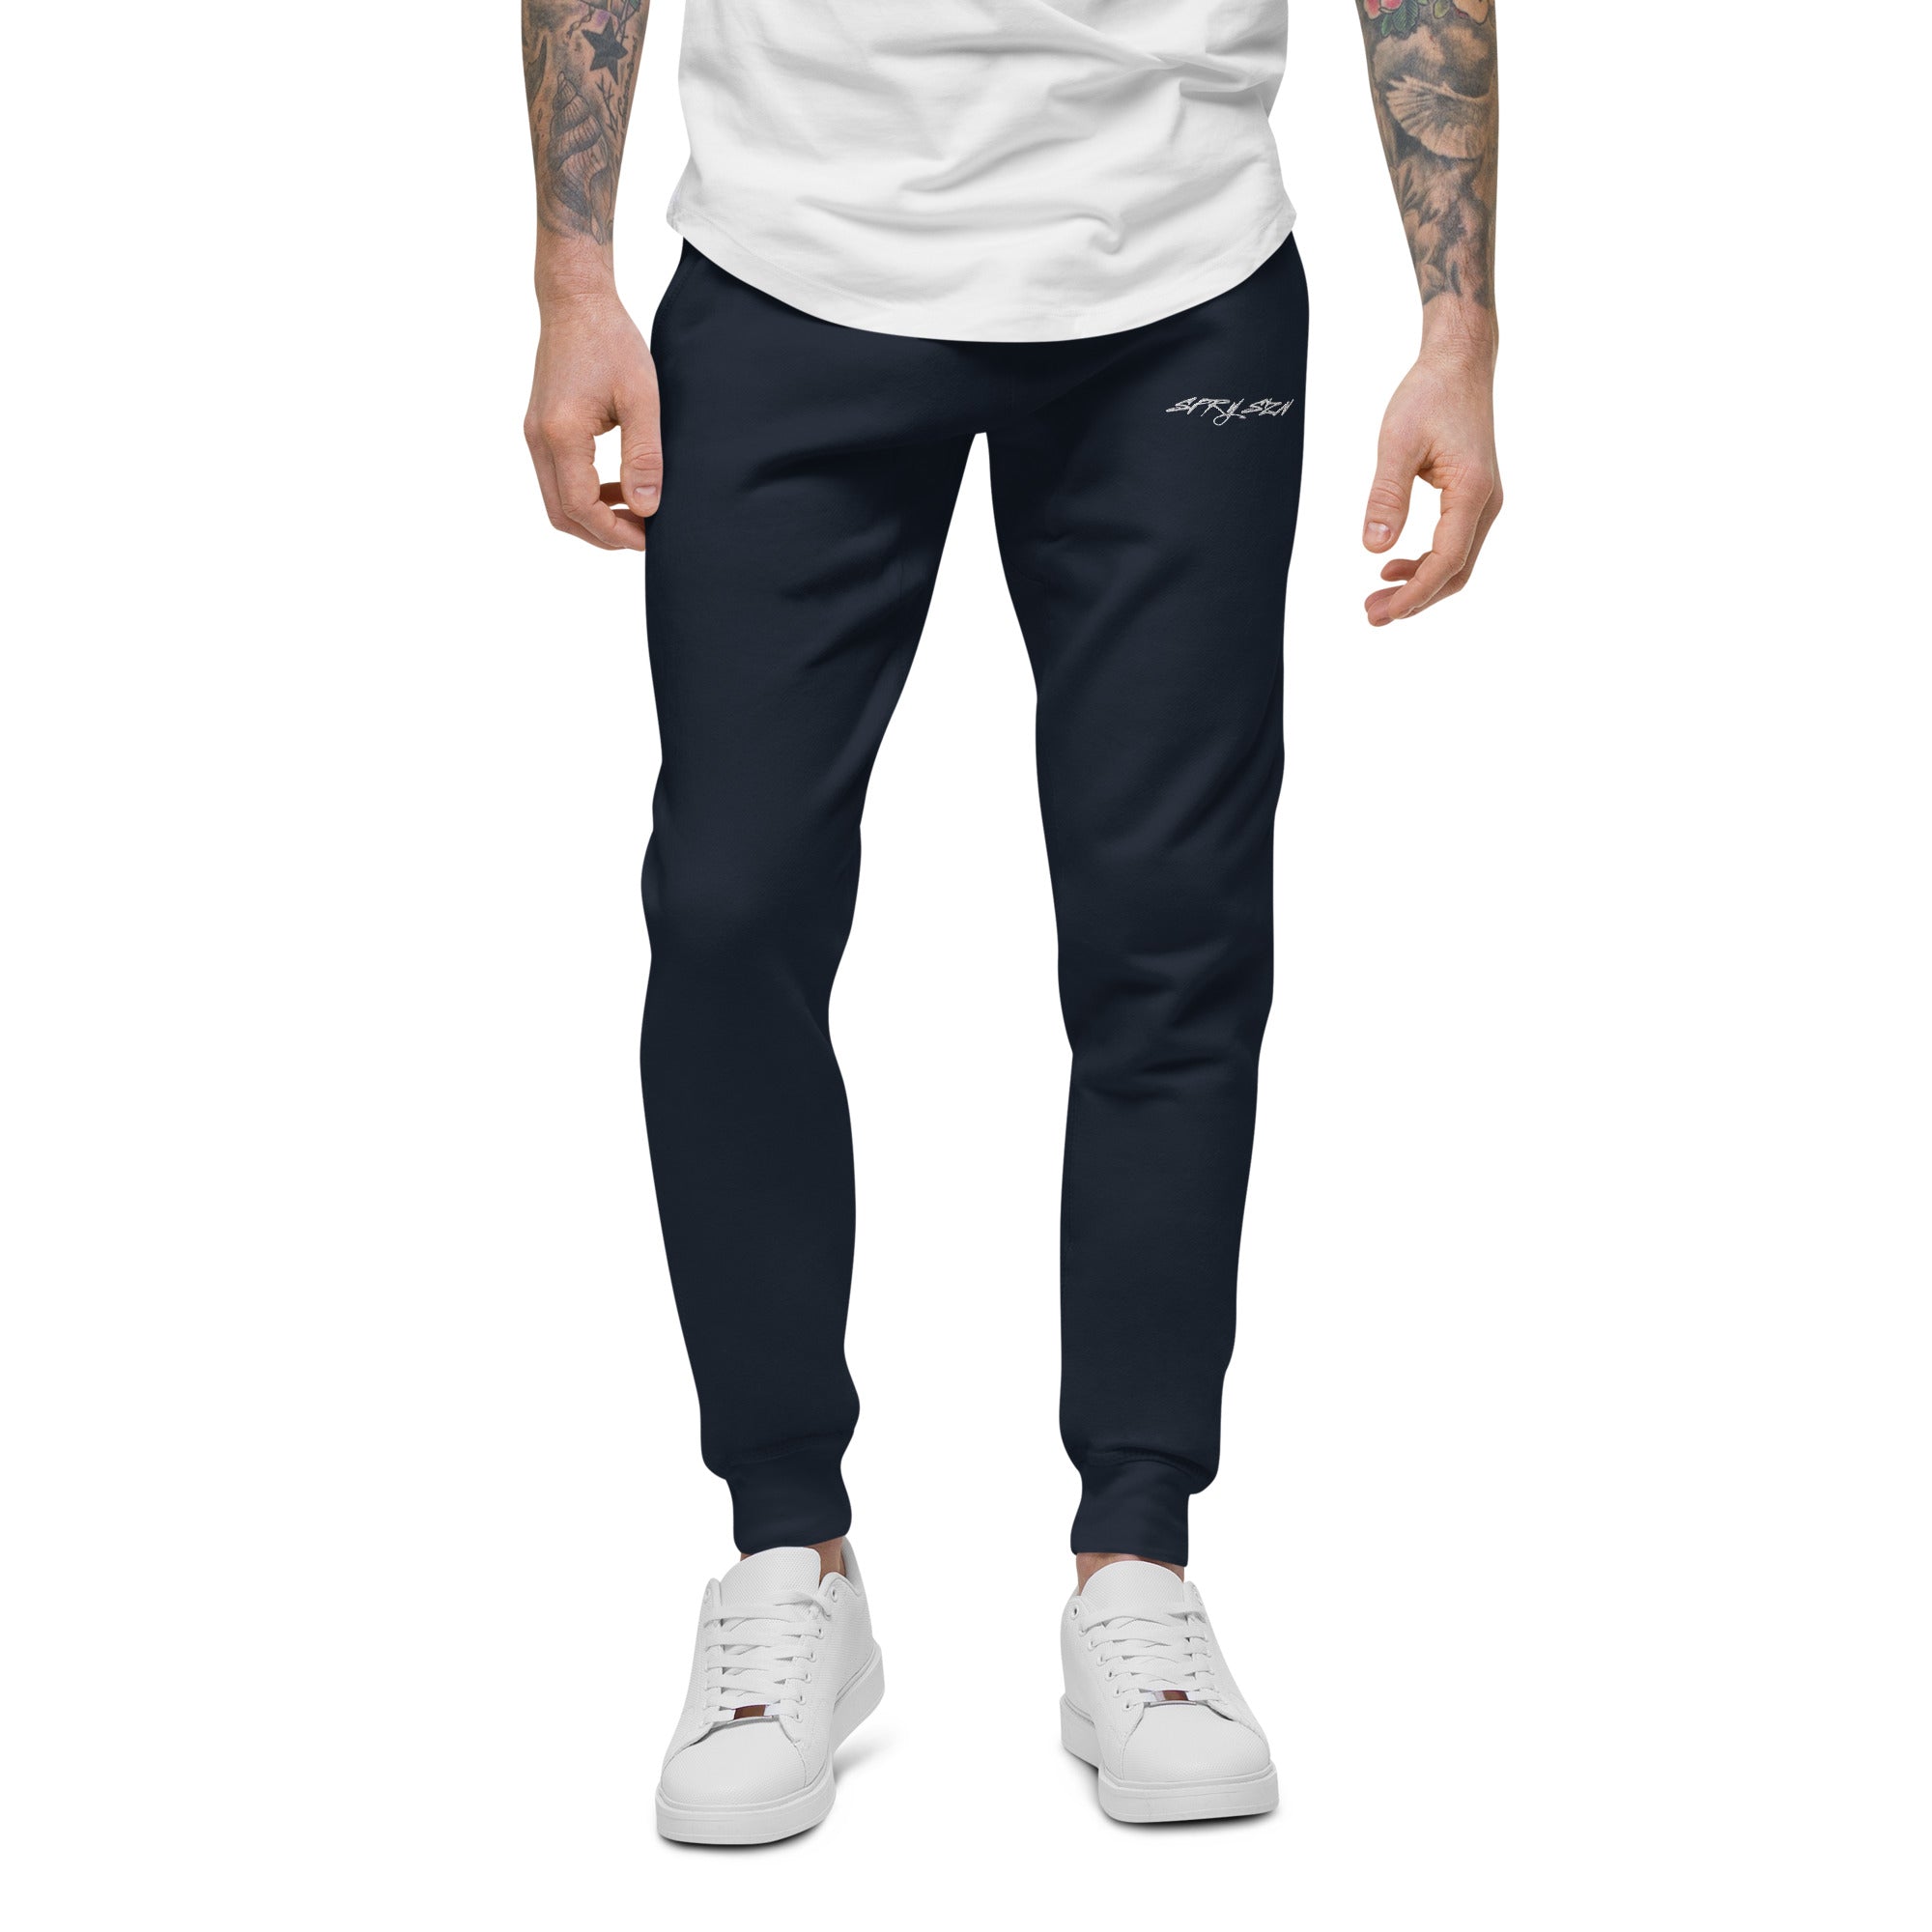 LEGACY Joggers - White Lettering